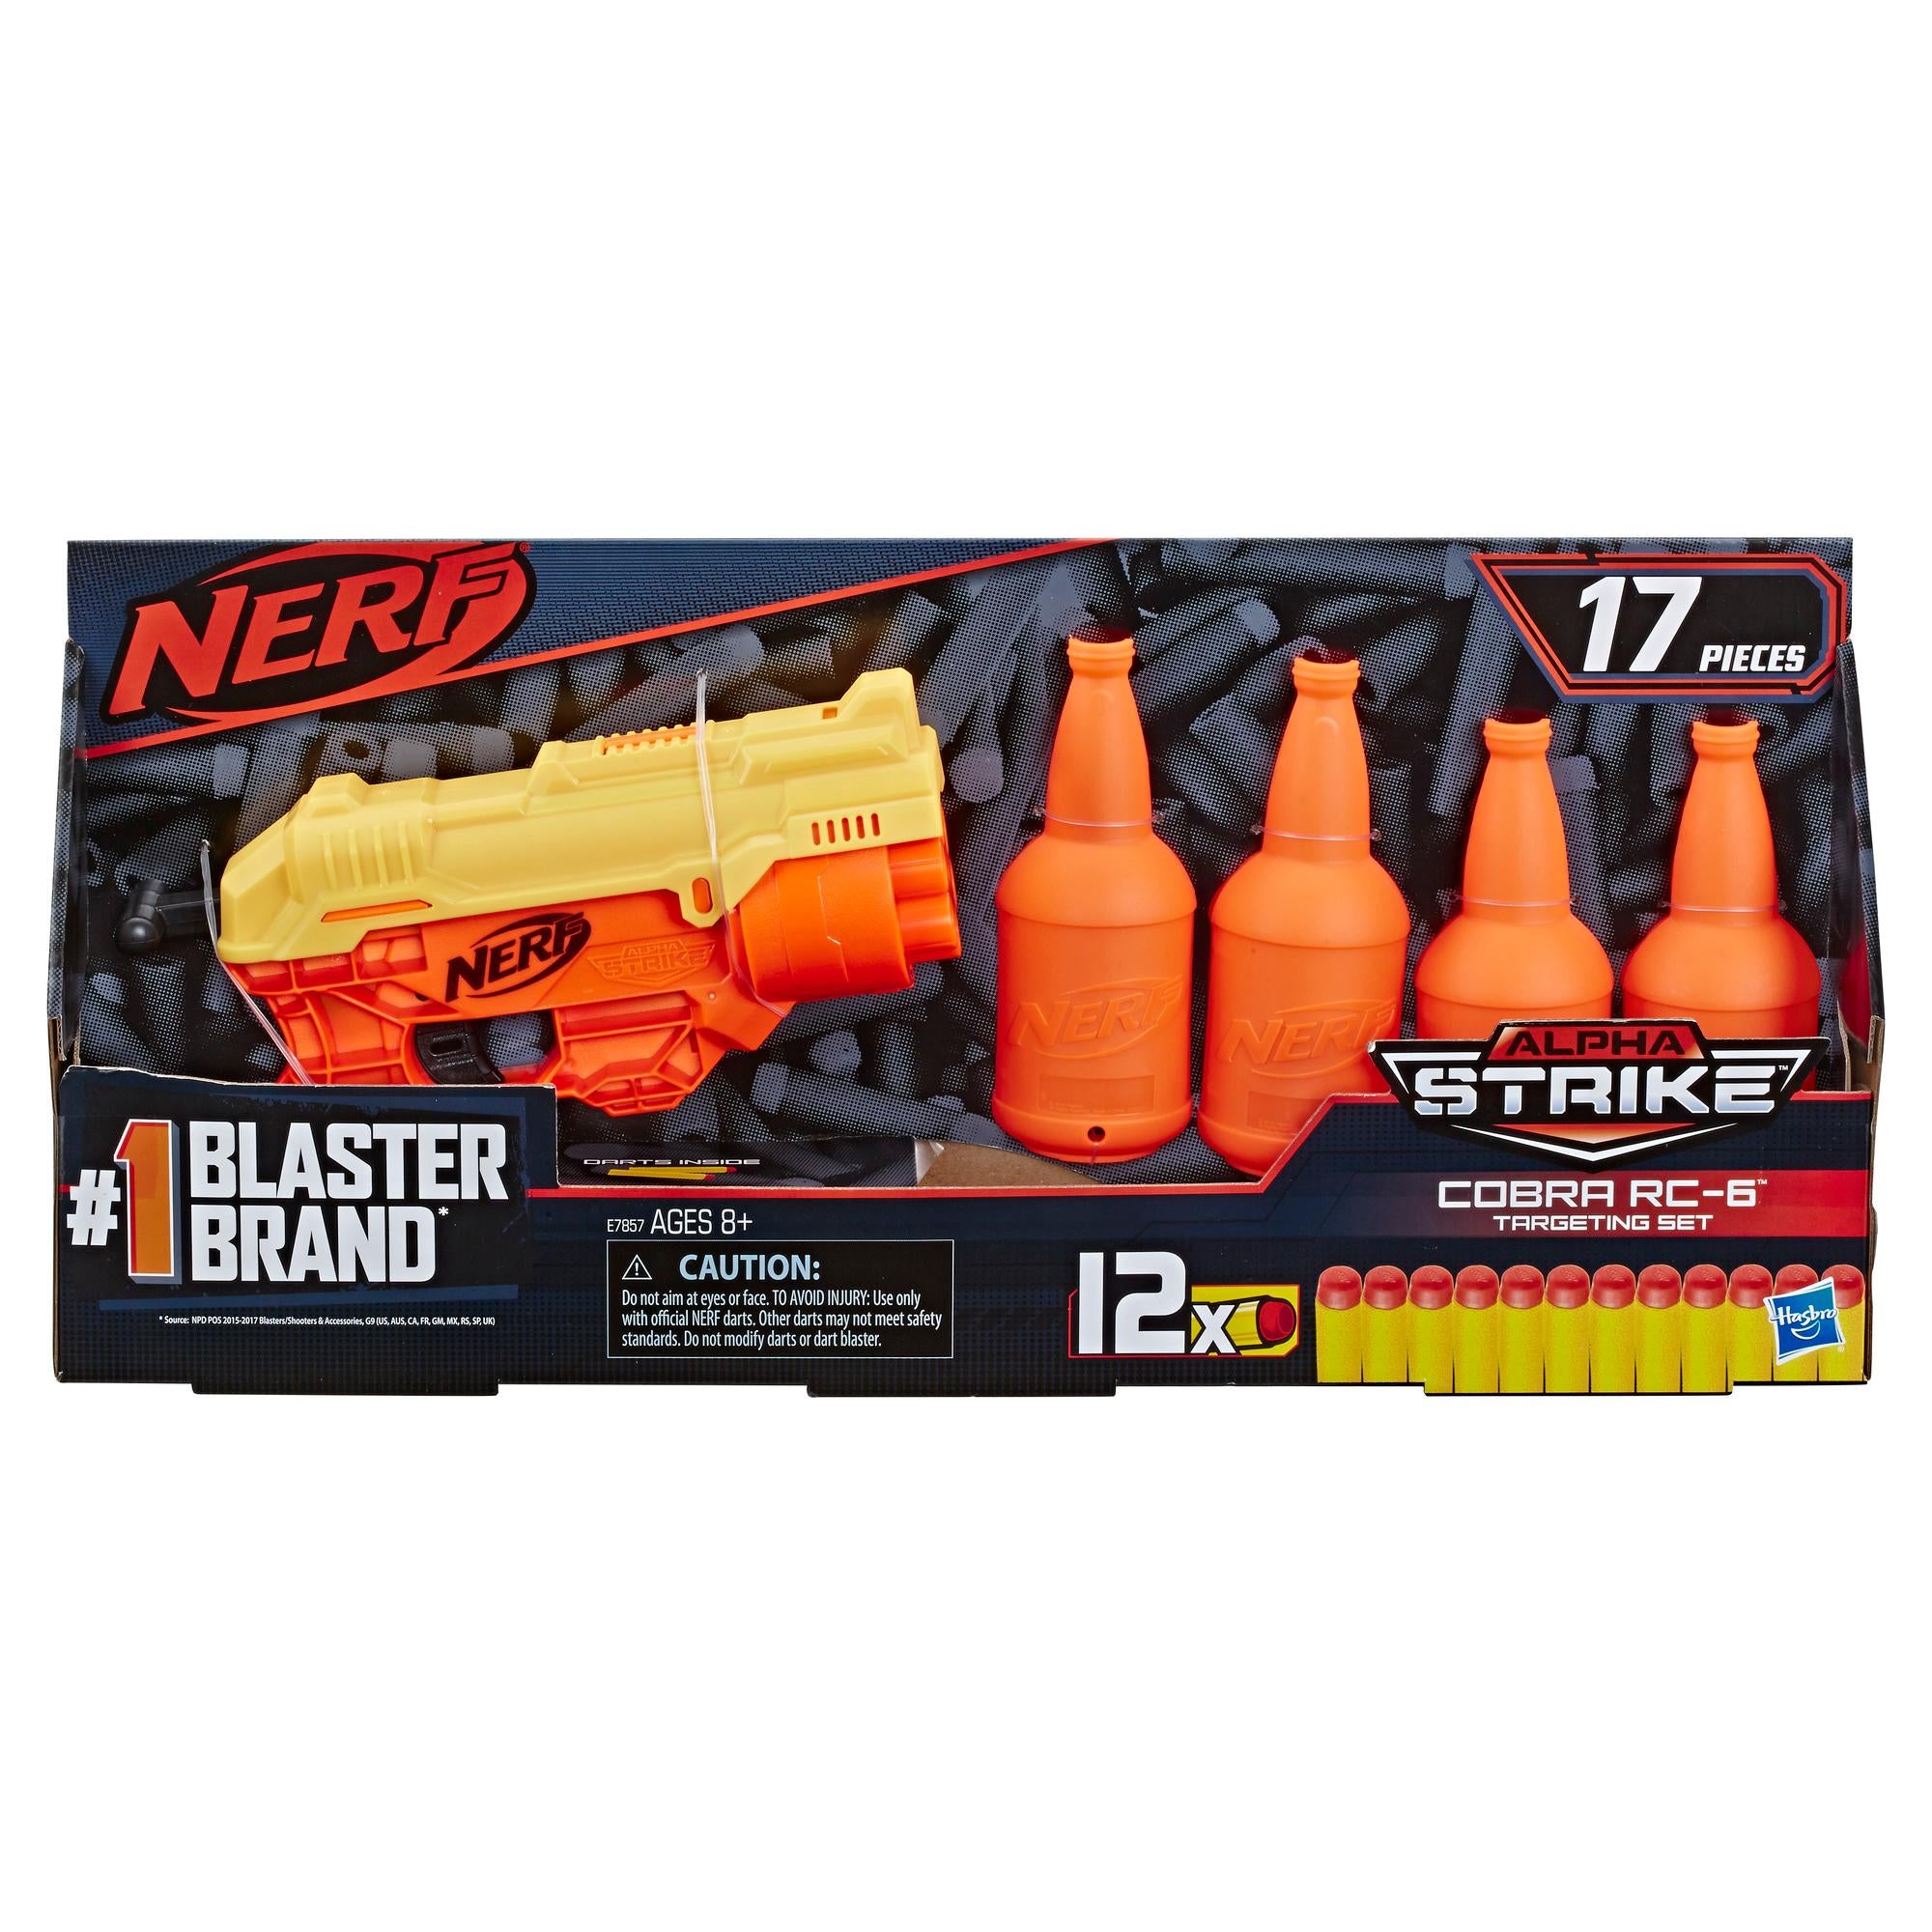 Nerf Dart Tag Chest Target Shield Protection In Red Adjustable Straps Unisex